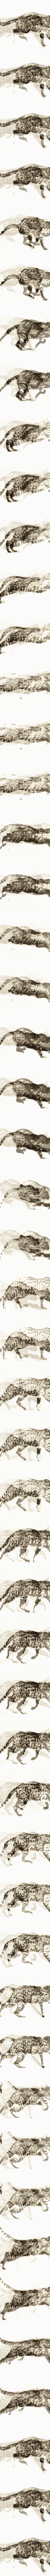 Cat Trotting, Changing To A Gallop (Hard-light-3-0.091-261)